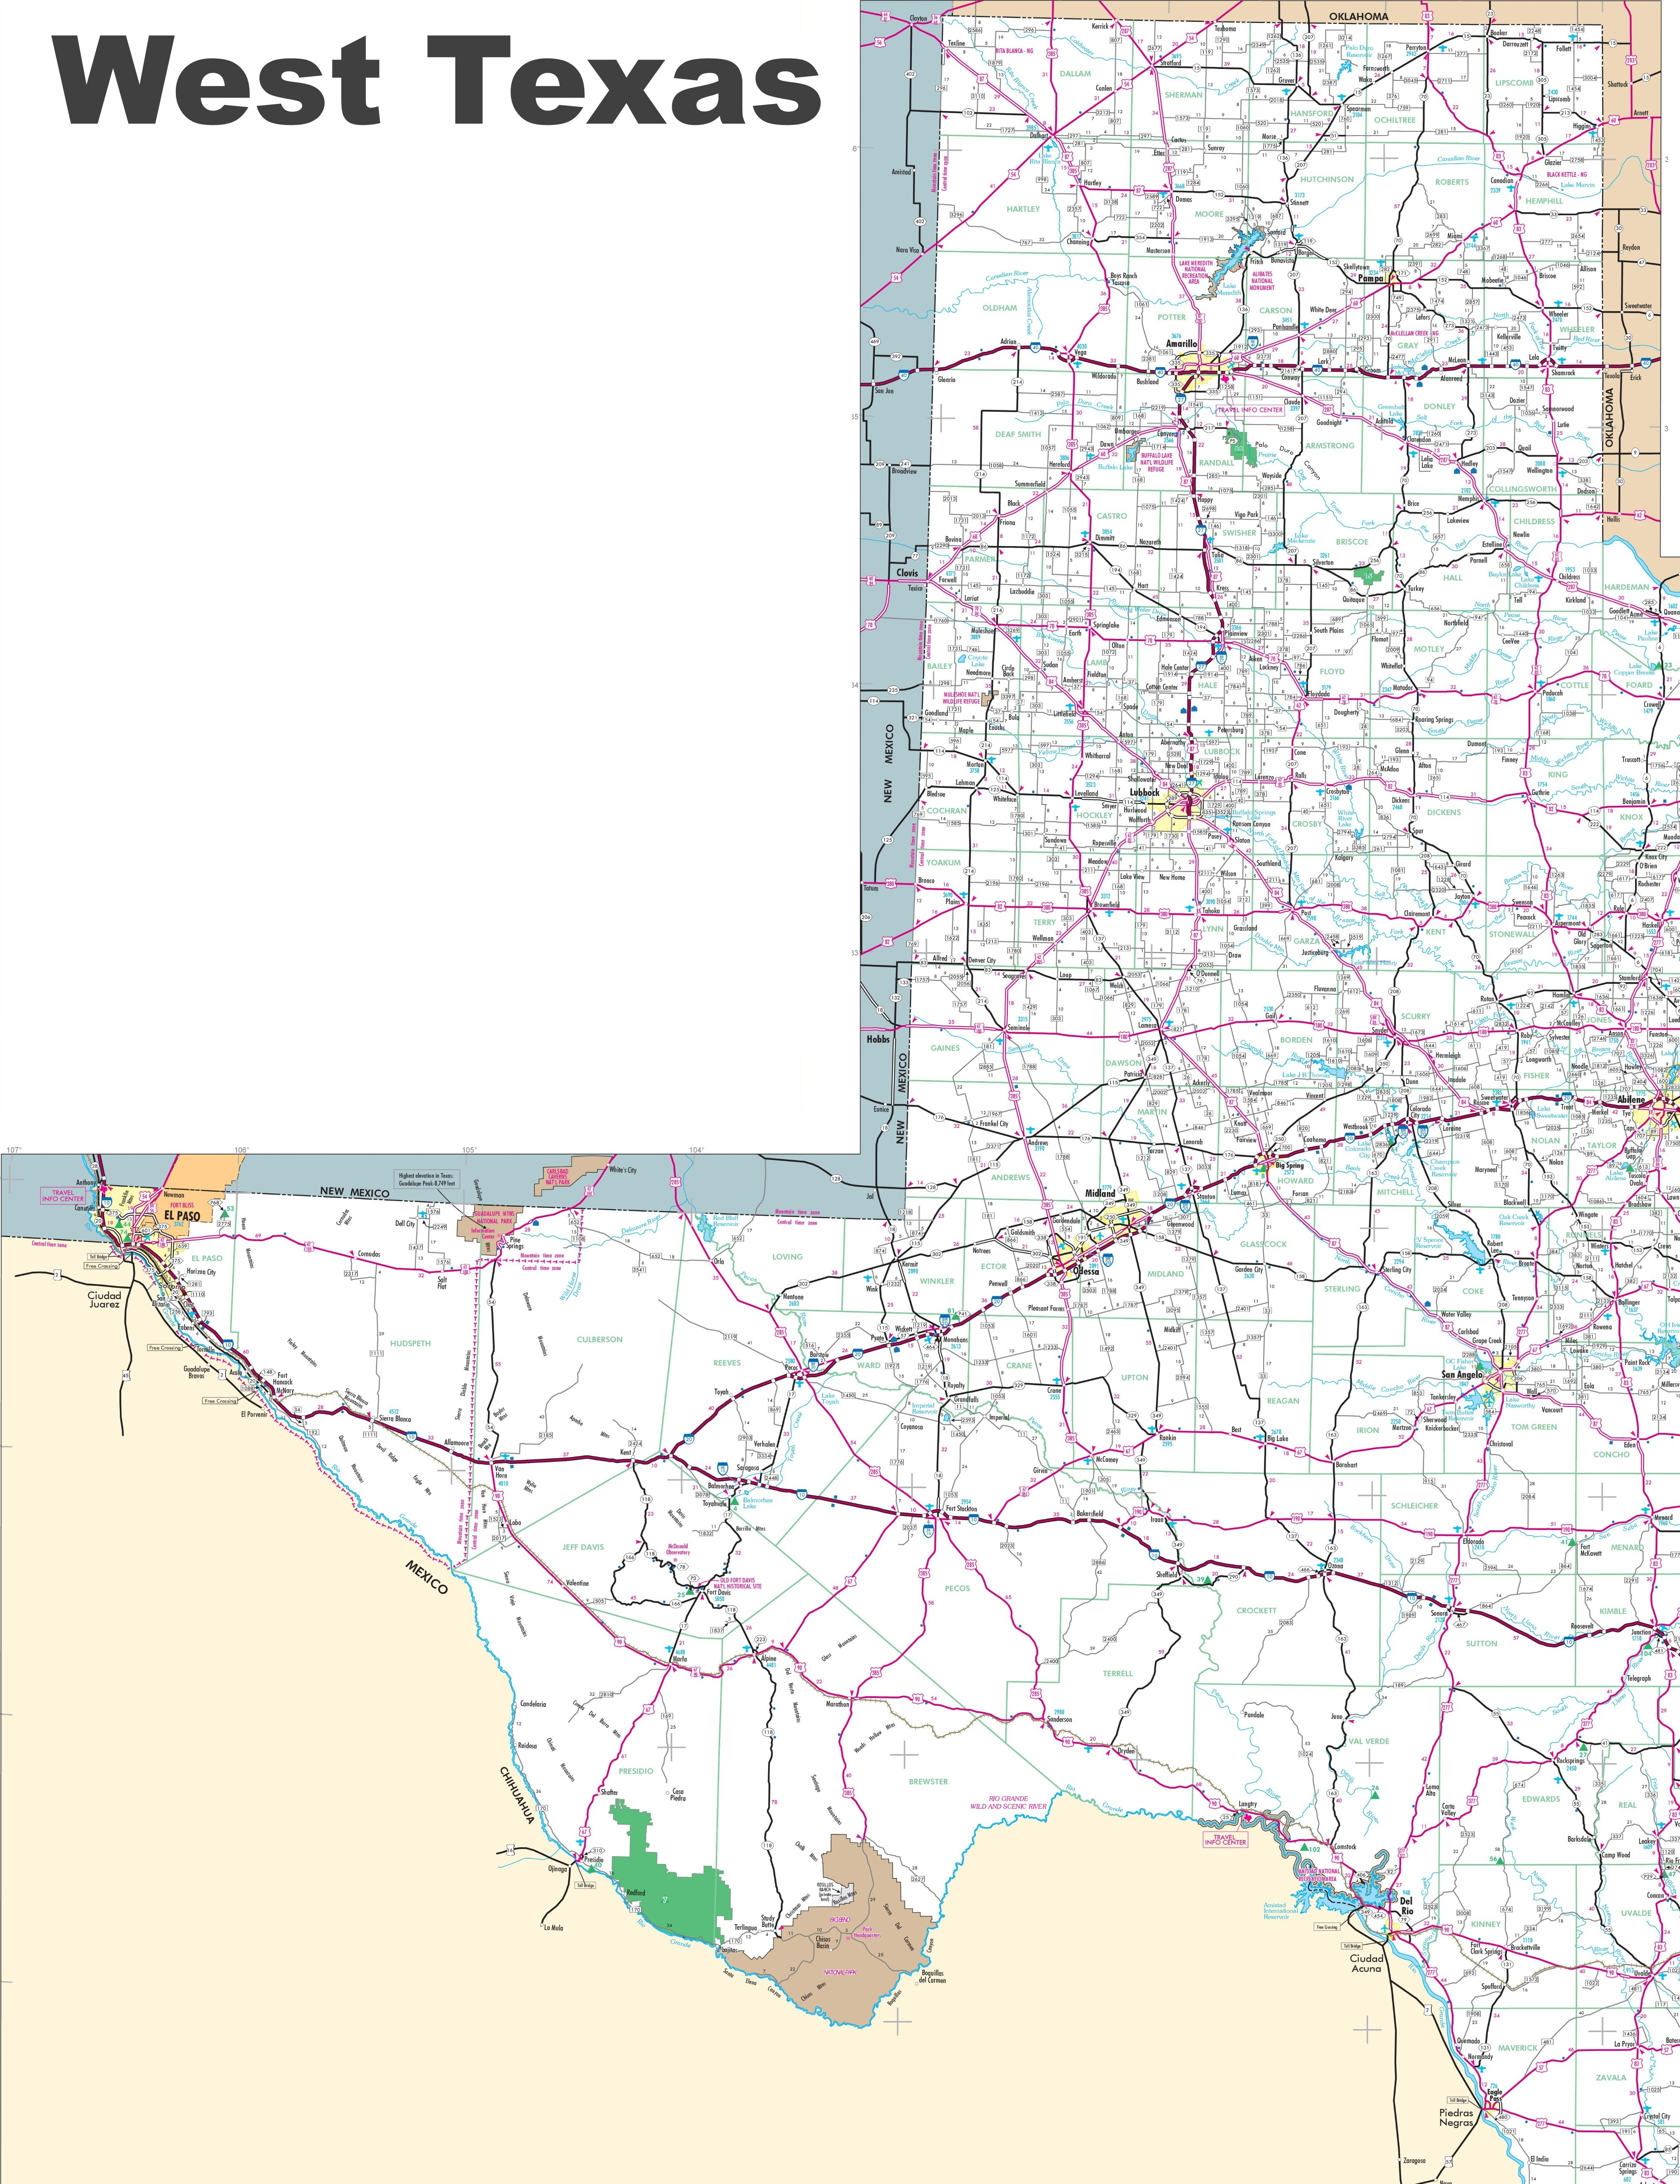 Picture Of Texas On A Us Map Tx Largemap Beautiful Map Of West Texas - Fort Davis Texas Map